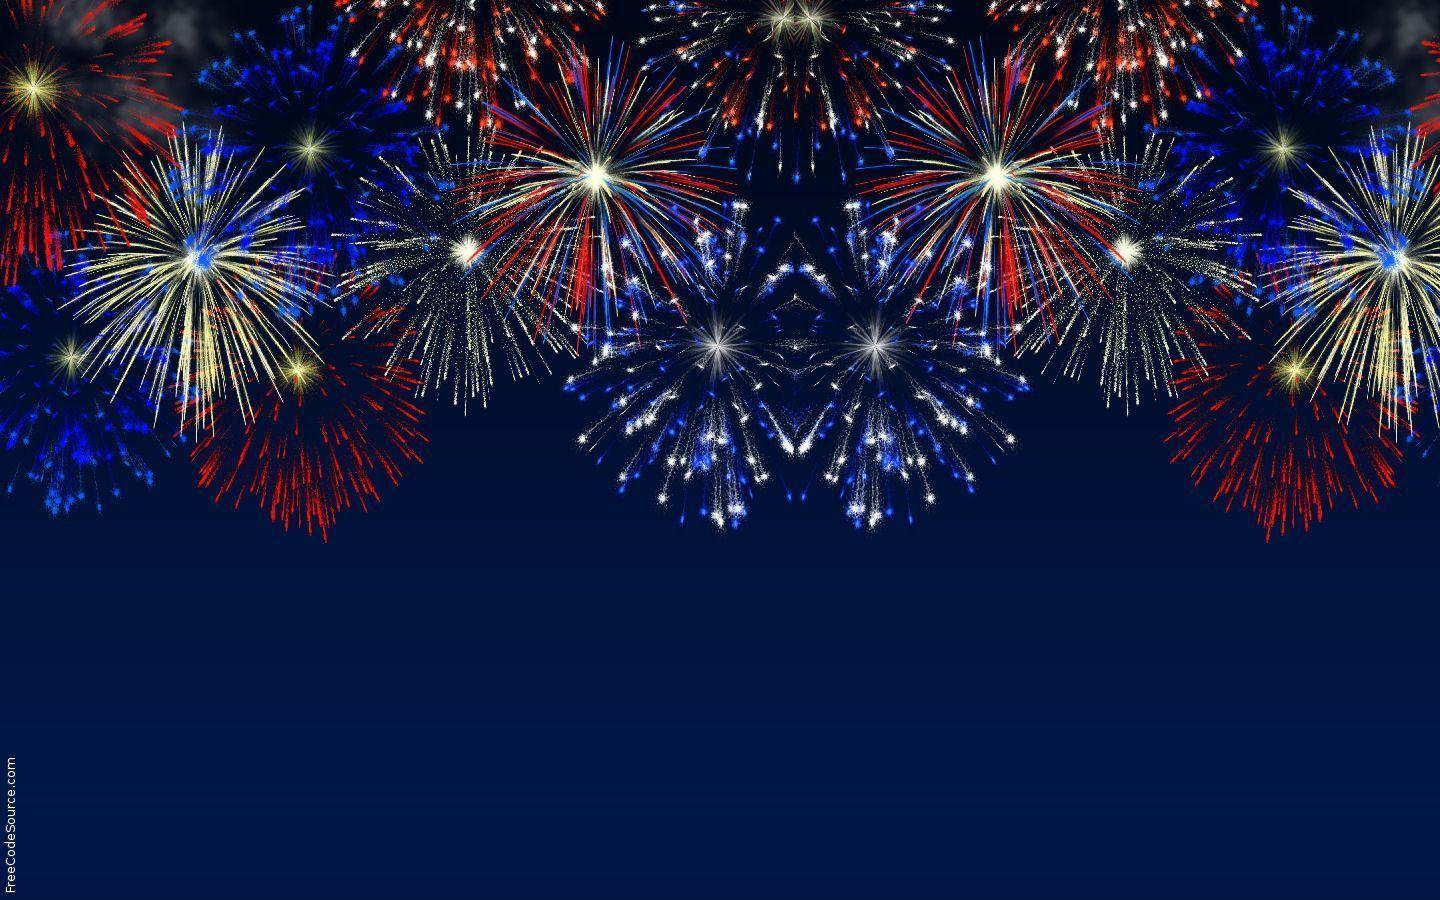 Gallery For Gt Firework Blue Background